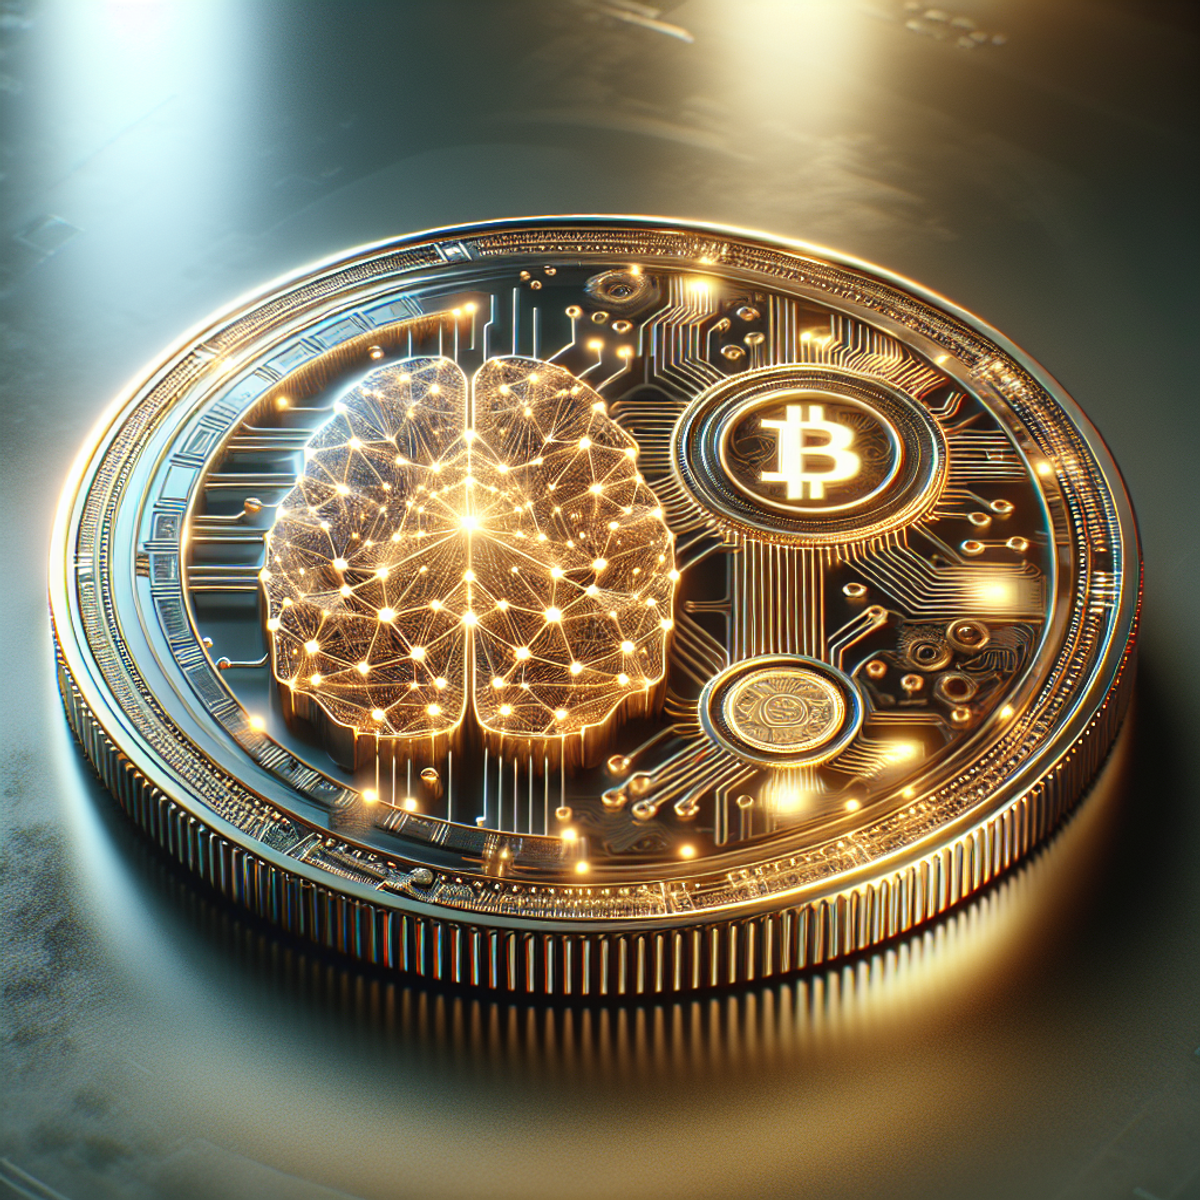 A sophisticated, futuristic gold coin adorned with symbols representing the fusion of artificial intelligence and cryptocurrencies. One side features a stylized, abstract neural network glowing with energy, while the other side showcases an iconic coin interwoven with circuitry patterns. The coin sits on a sleek, glassy surface under soft, ambient lighting, emphasizing its luminous and futuristic features.